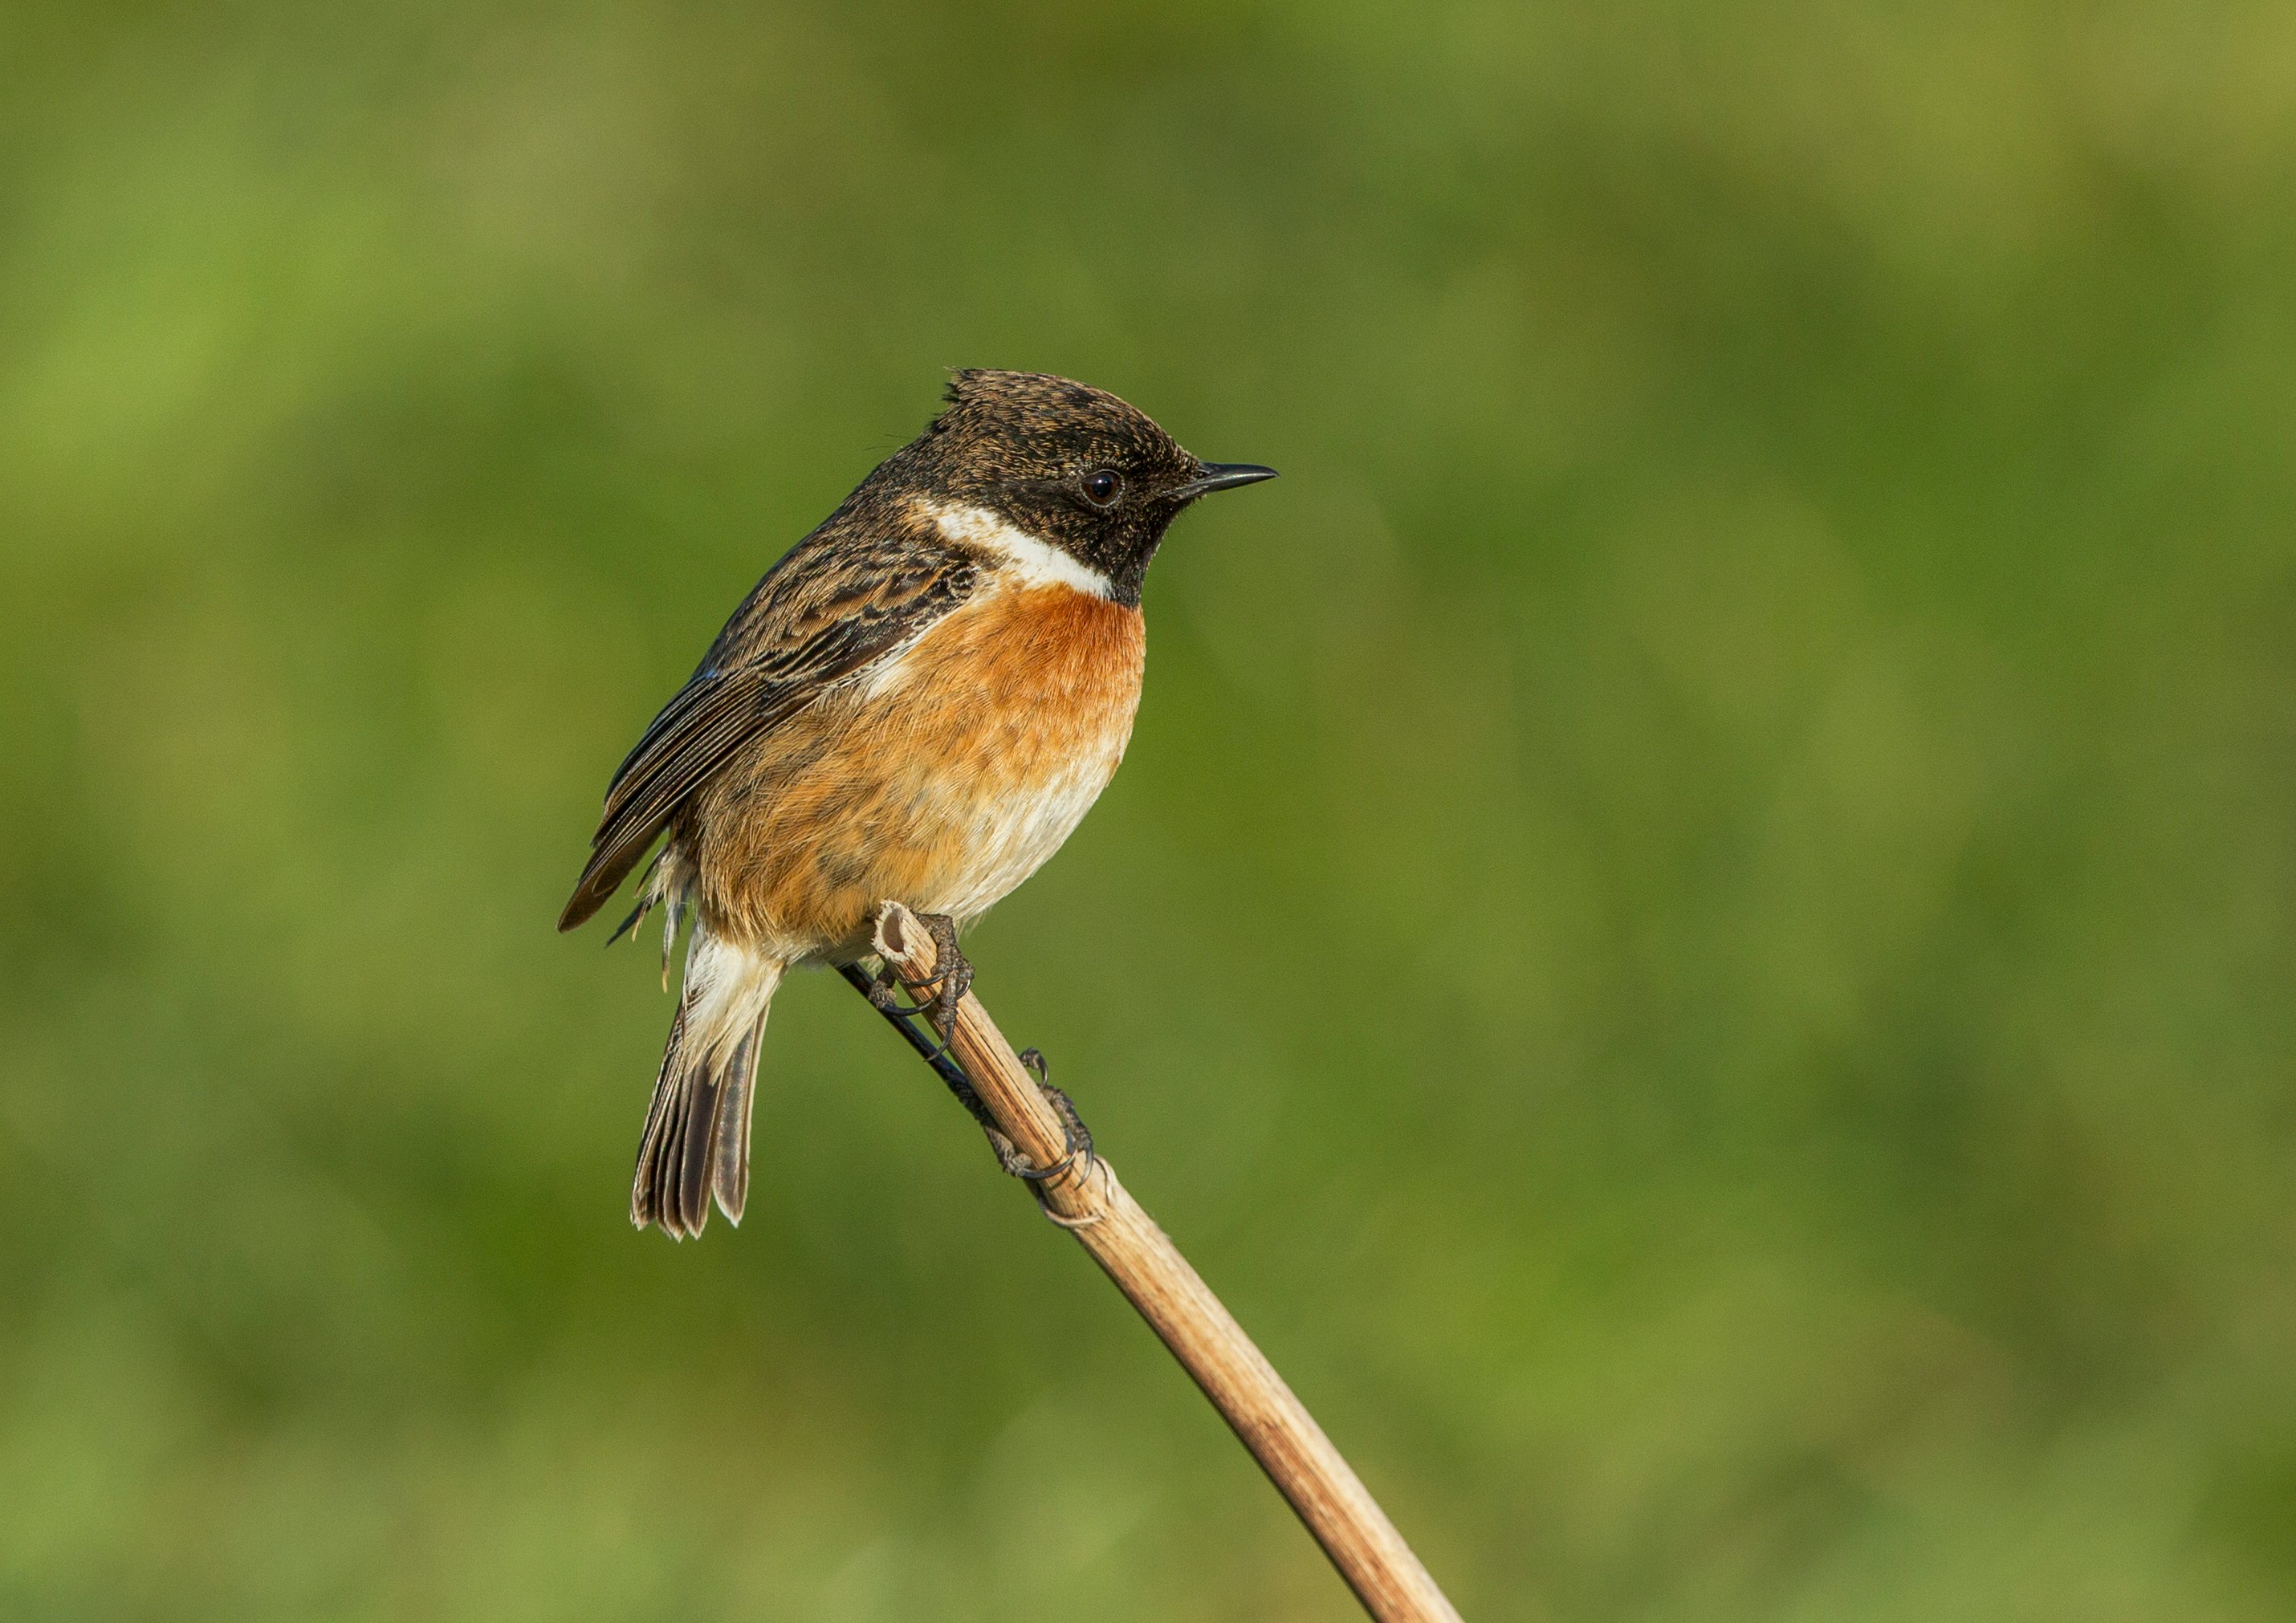 Young-Persons-winner-Male-Stonechat-Image-Credit-Kyra-Leigh-Sudlow-age-14